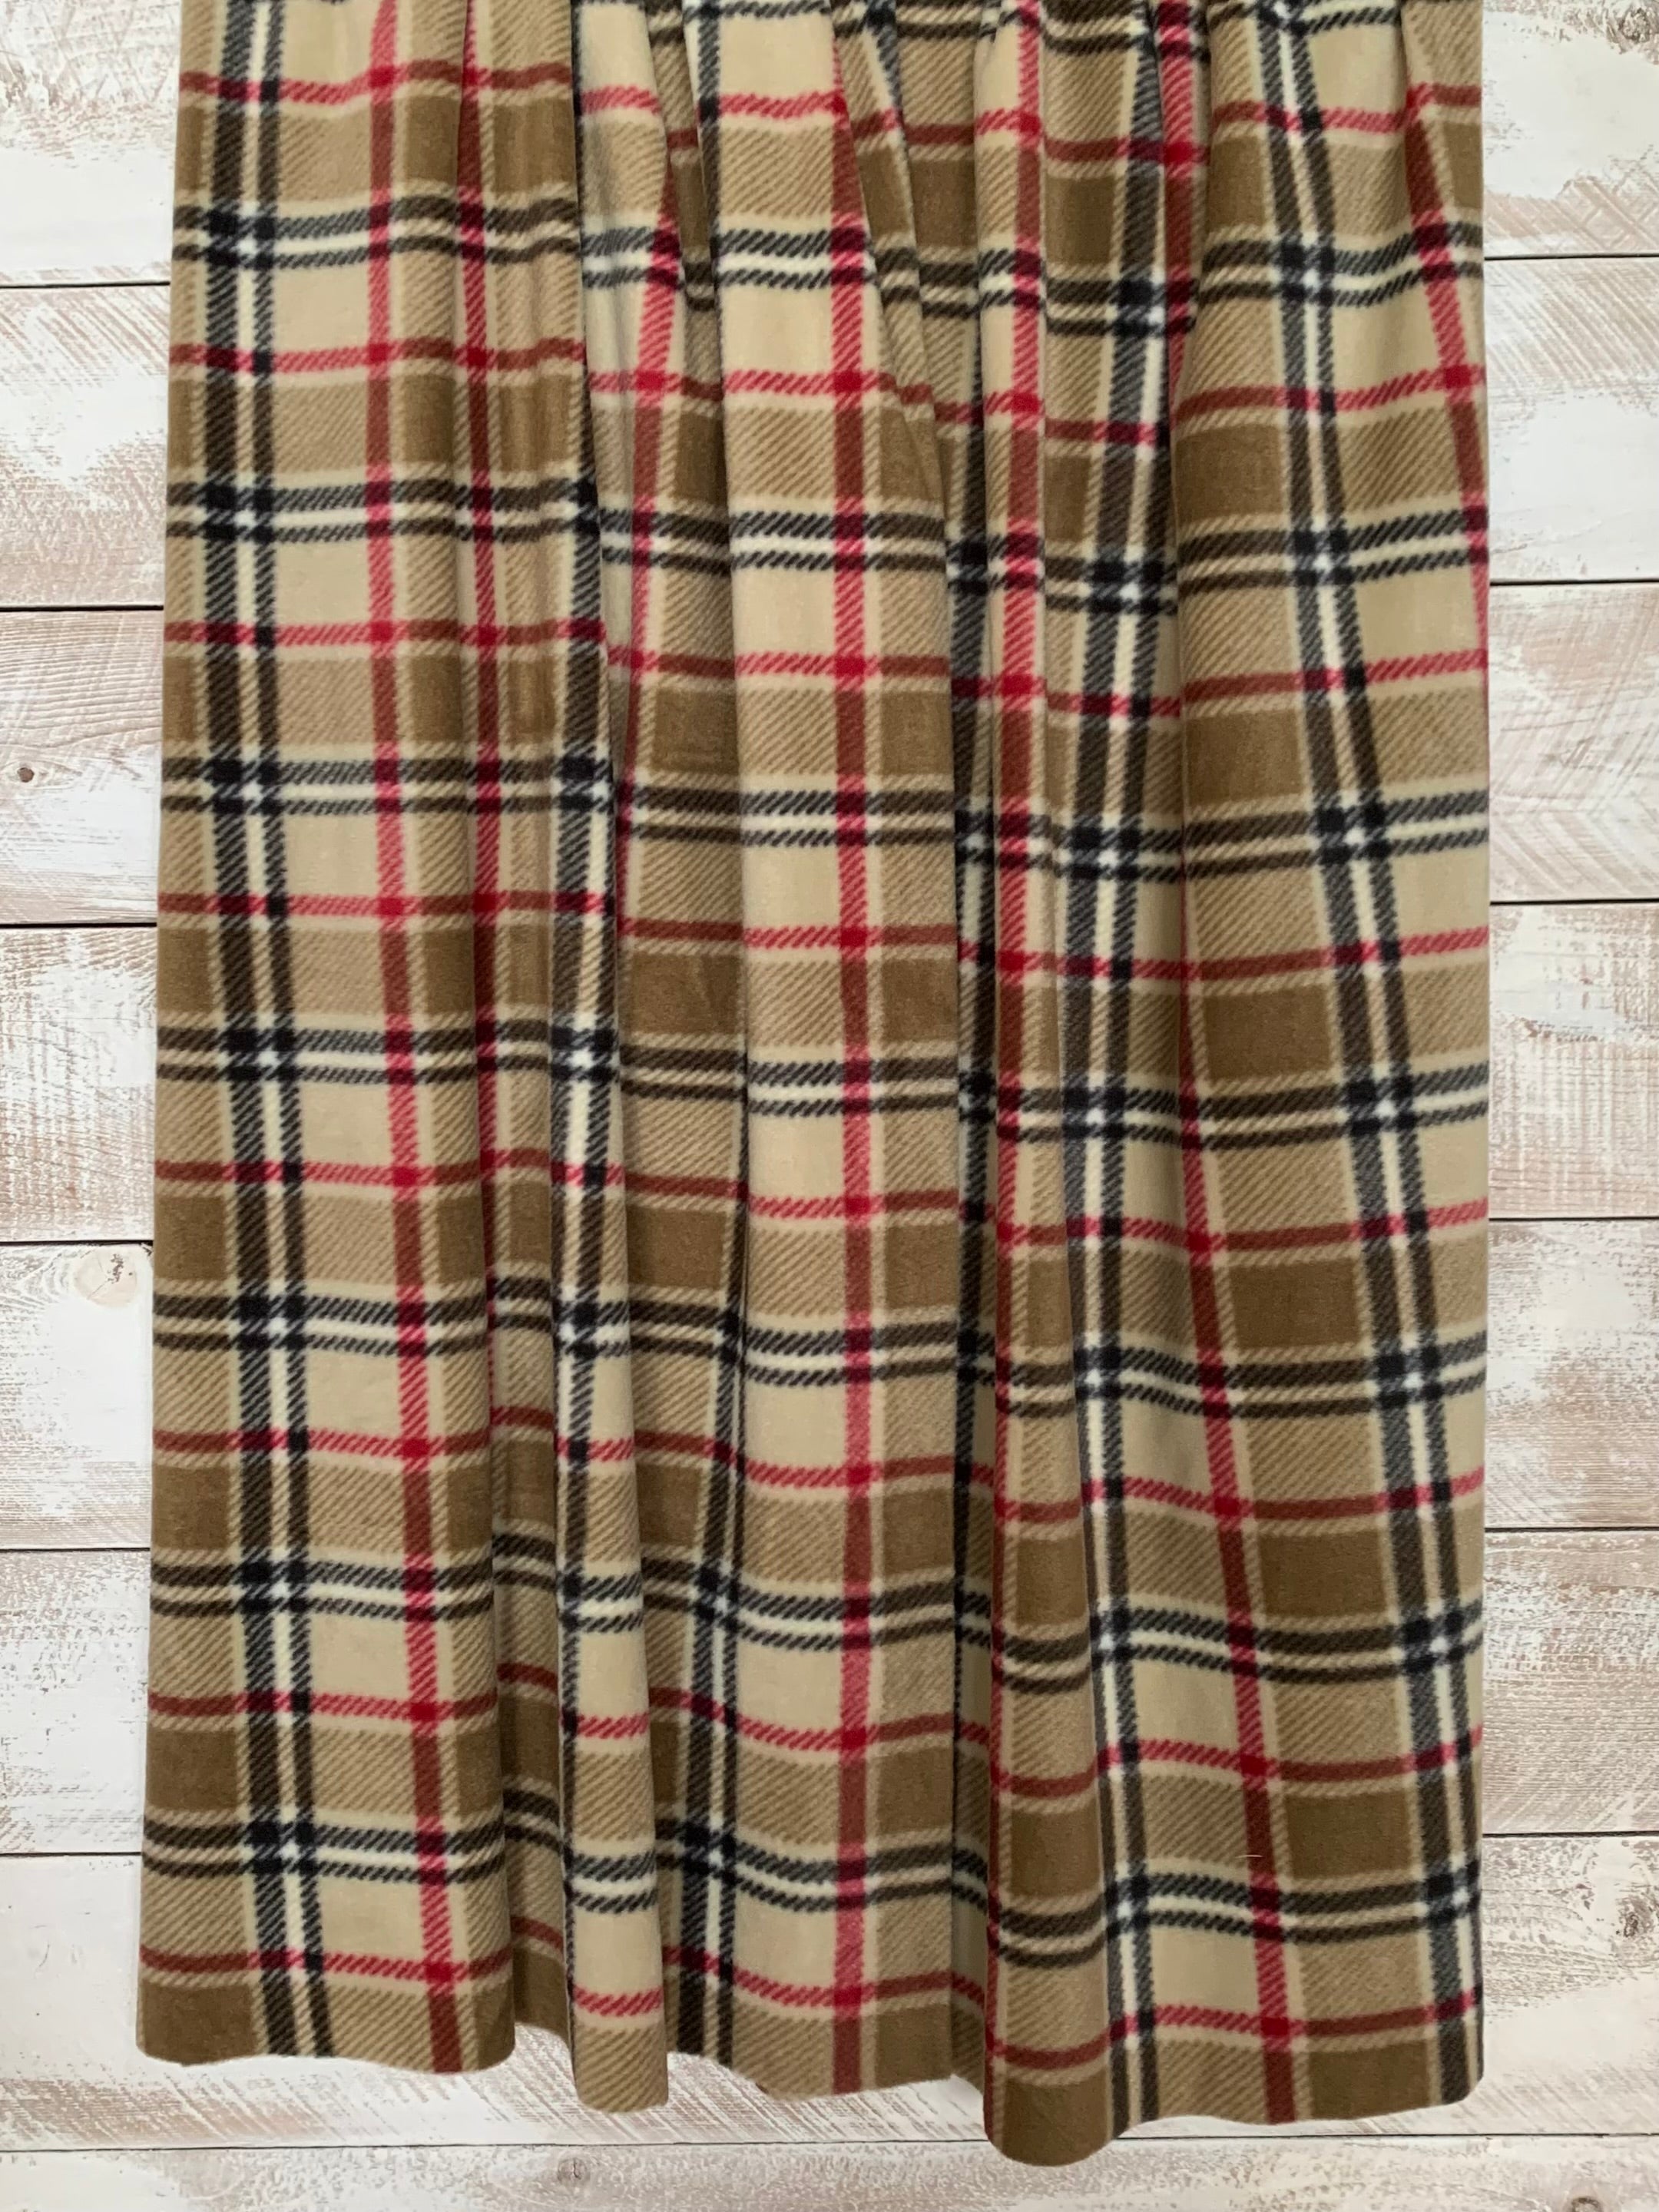 No Sew Blanket Kit - Beige, Black, Red, London Plaid - Personalization Available